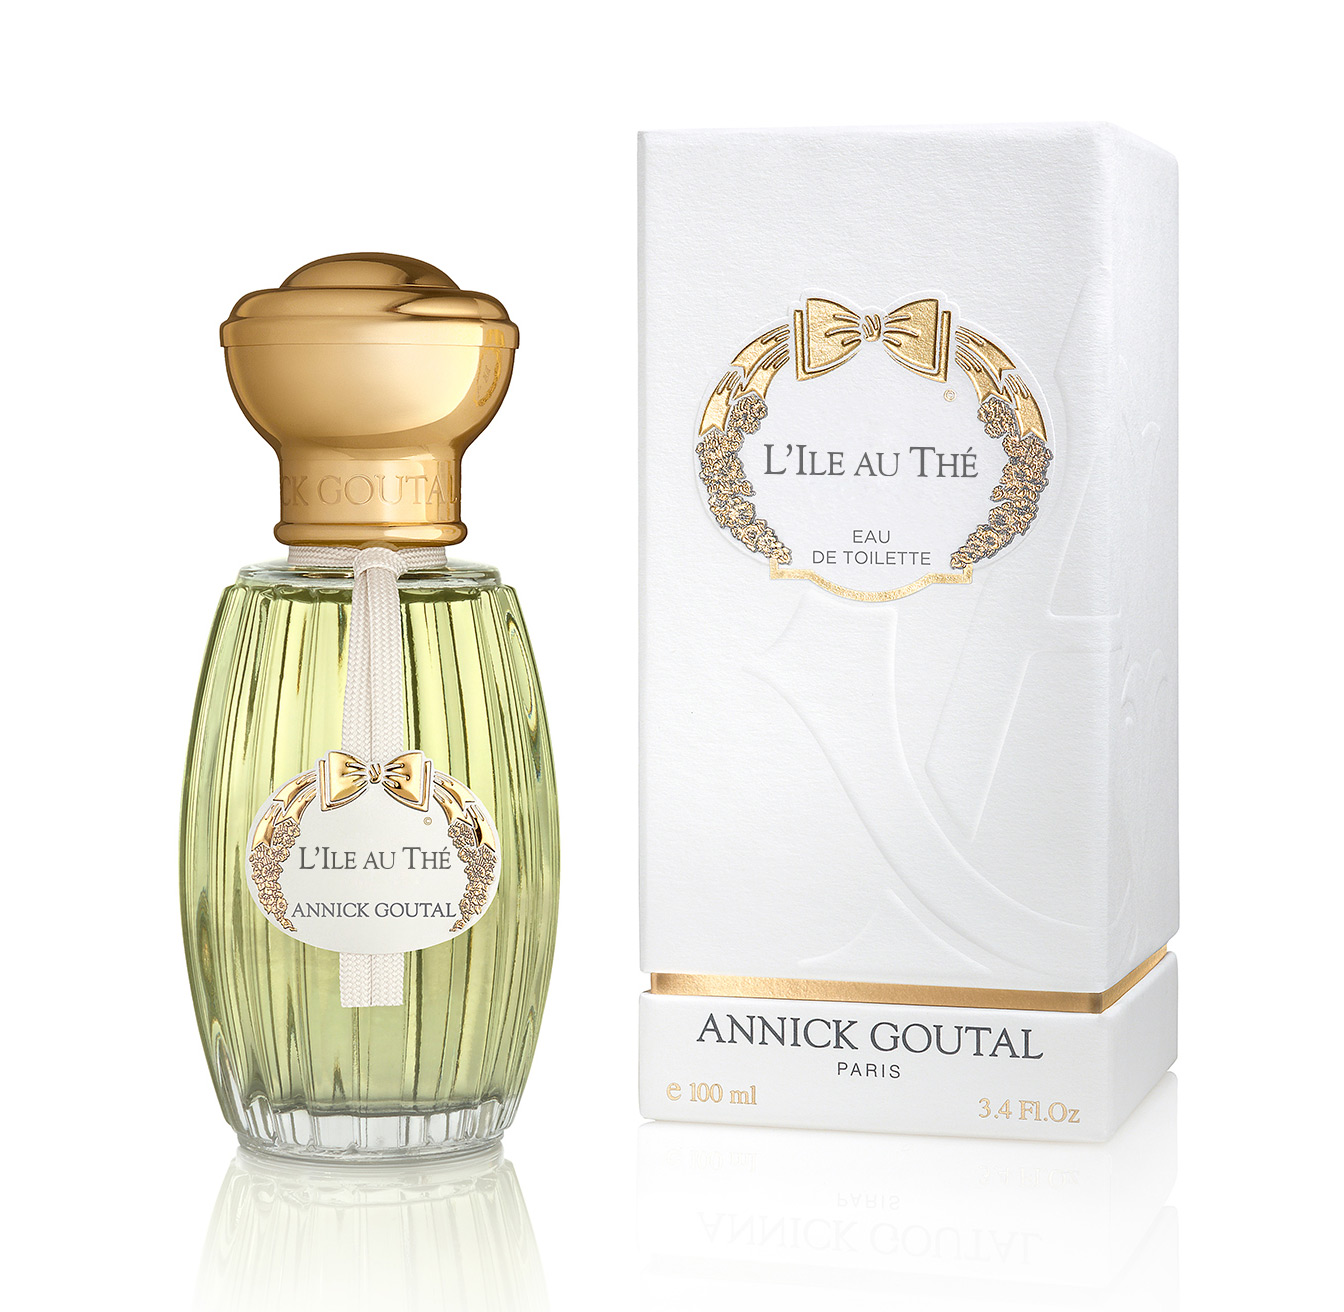 L’Ile au Thé Annick Goutal perfume - a new fragrance for women and men 2015